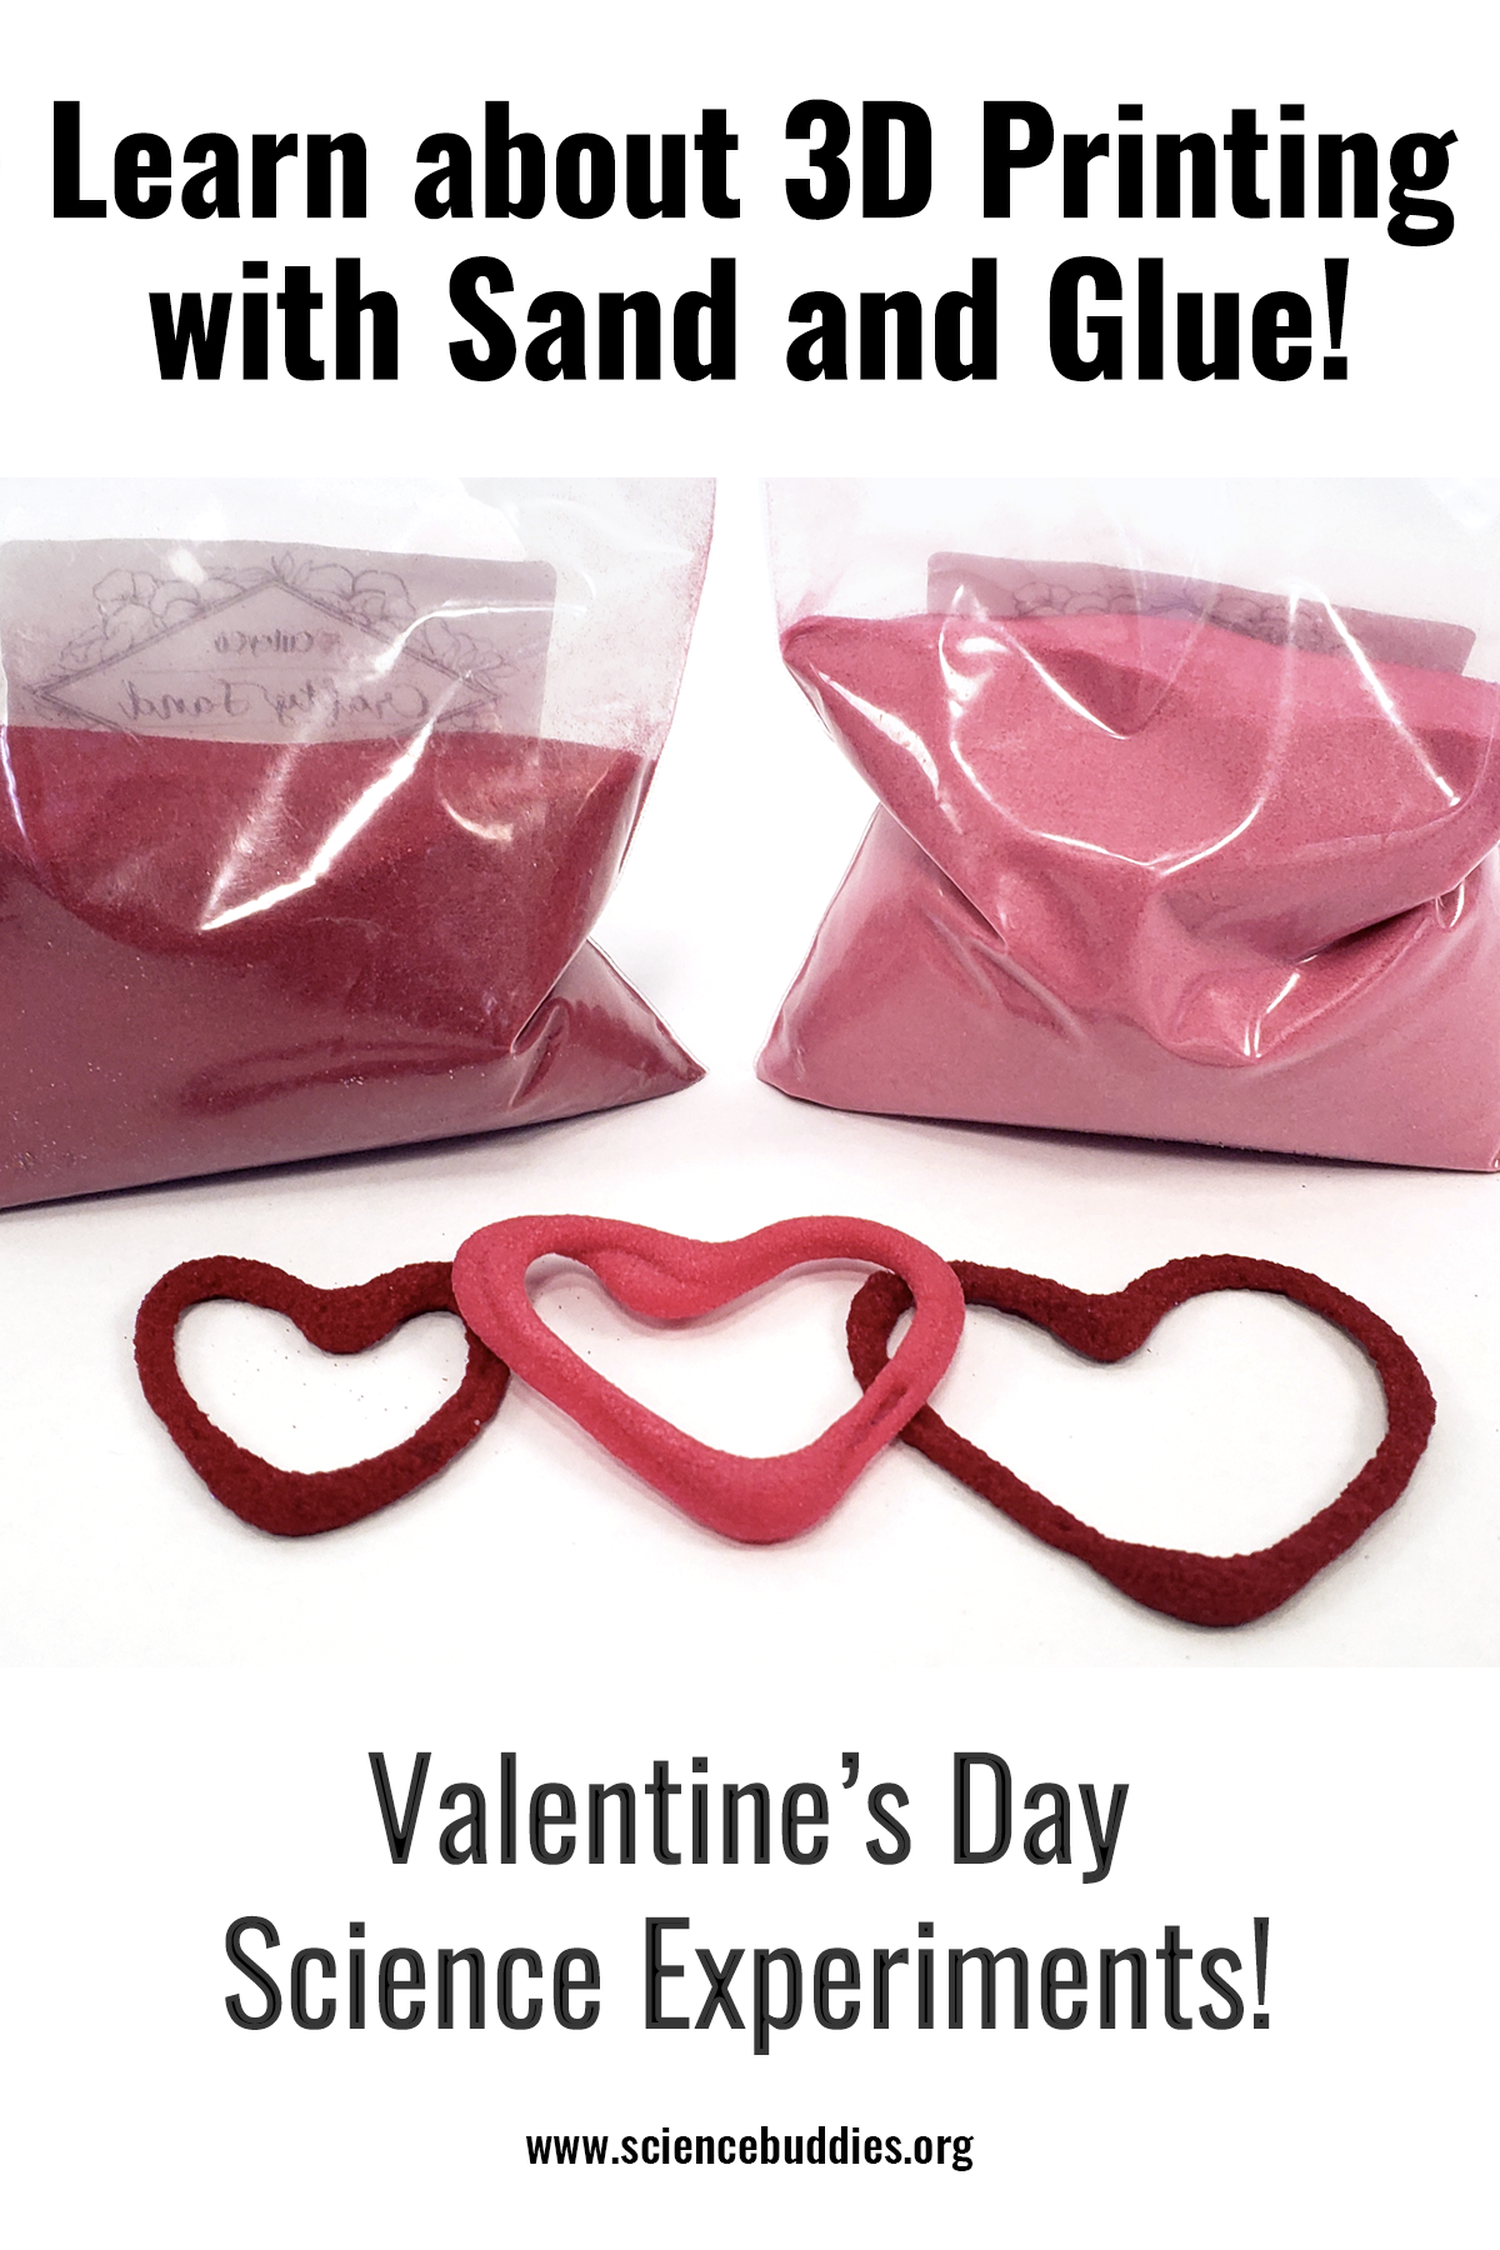 Valentine's Day STEM Experiments - shapes made with 3D print with glue and sand science experiment